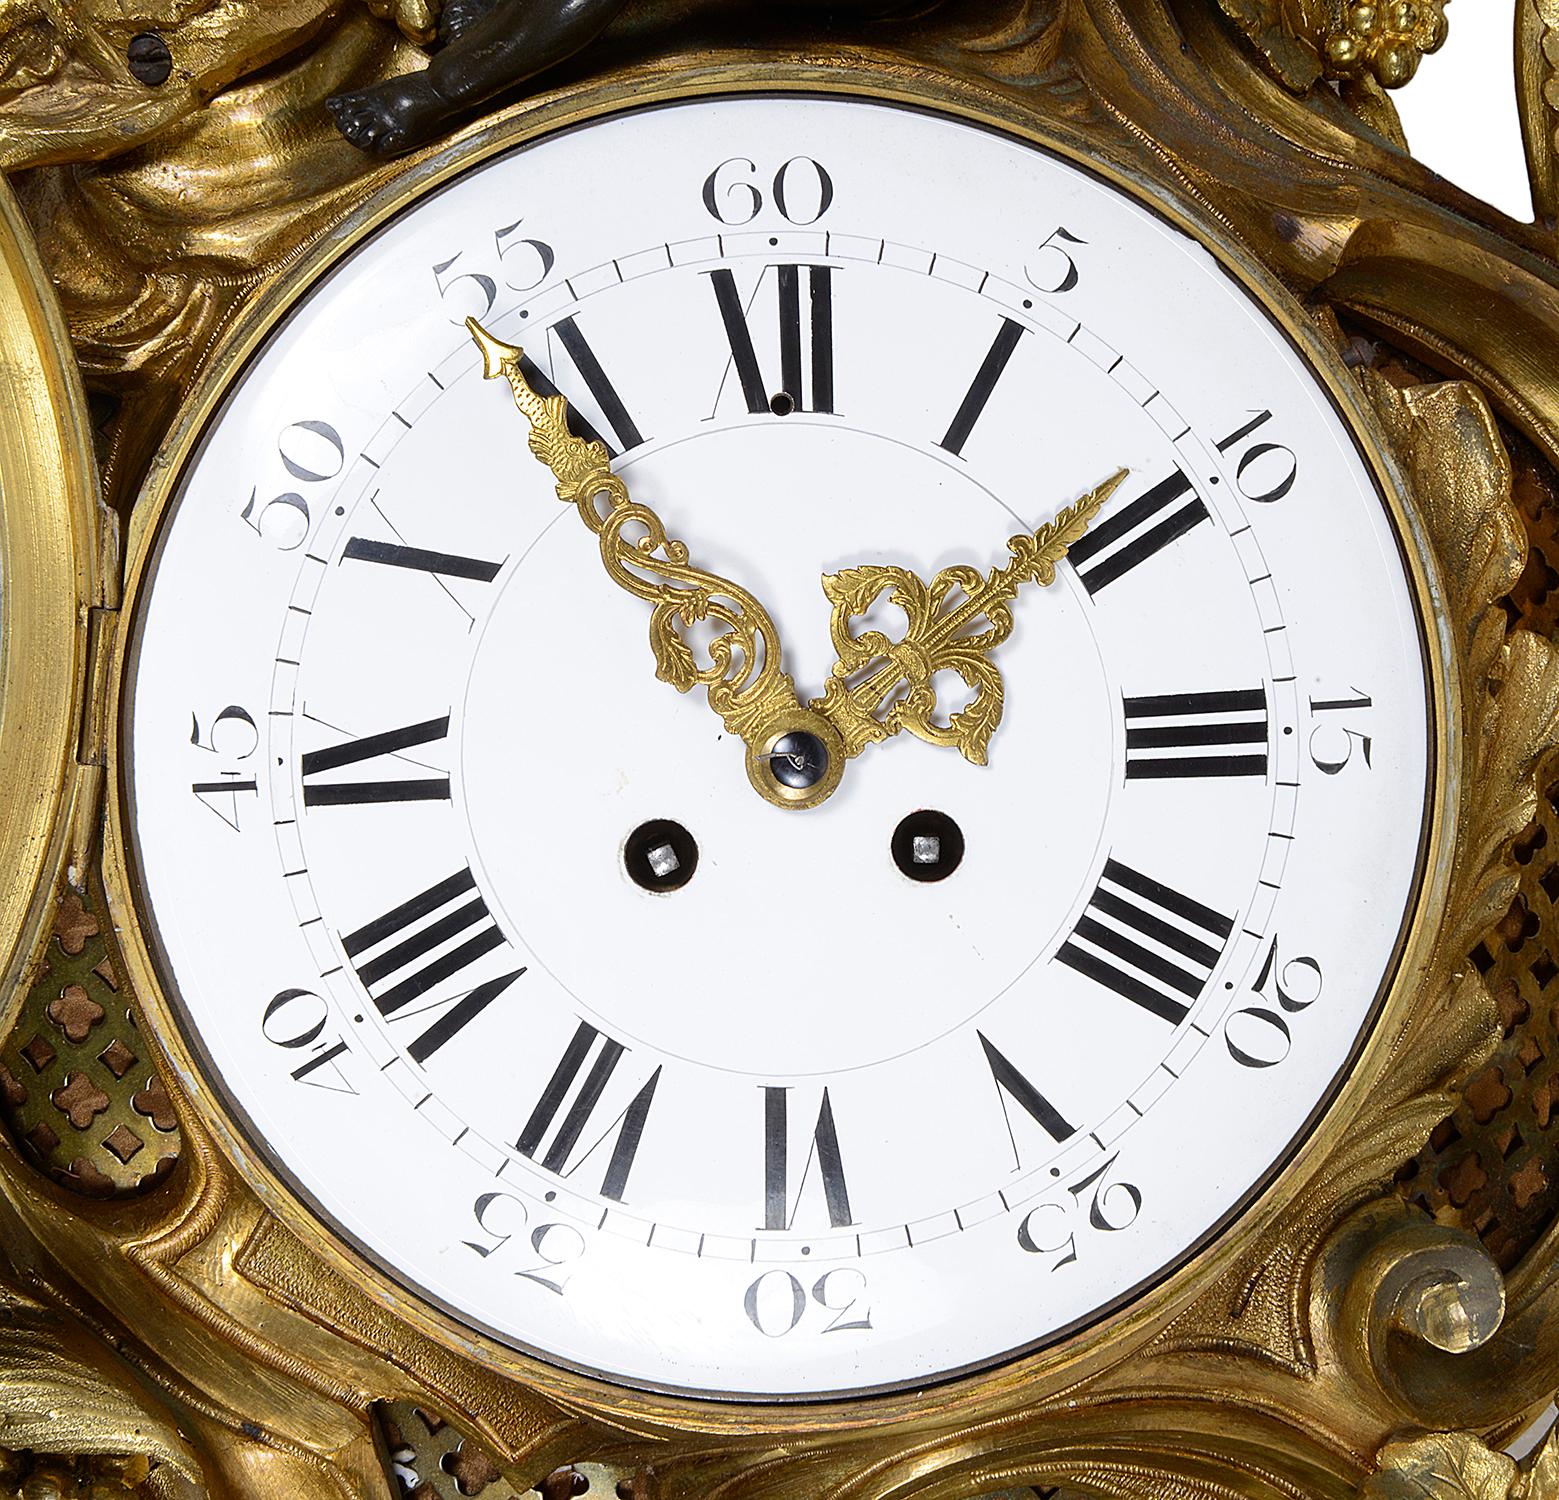 A very impressive 19th century Louis XVI style gilded ormolu and patinated bronze sun burst cartel wall clock. Depicting cherubs among clouds and sun rays. The white enamel clock face with Roman numerals, the movement having an eight-day duration